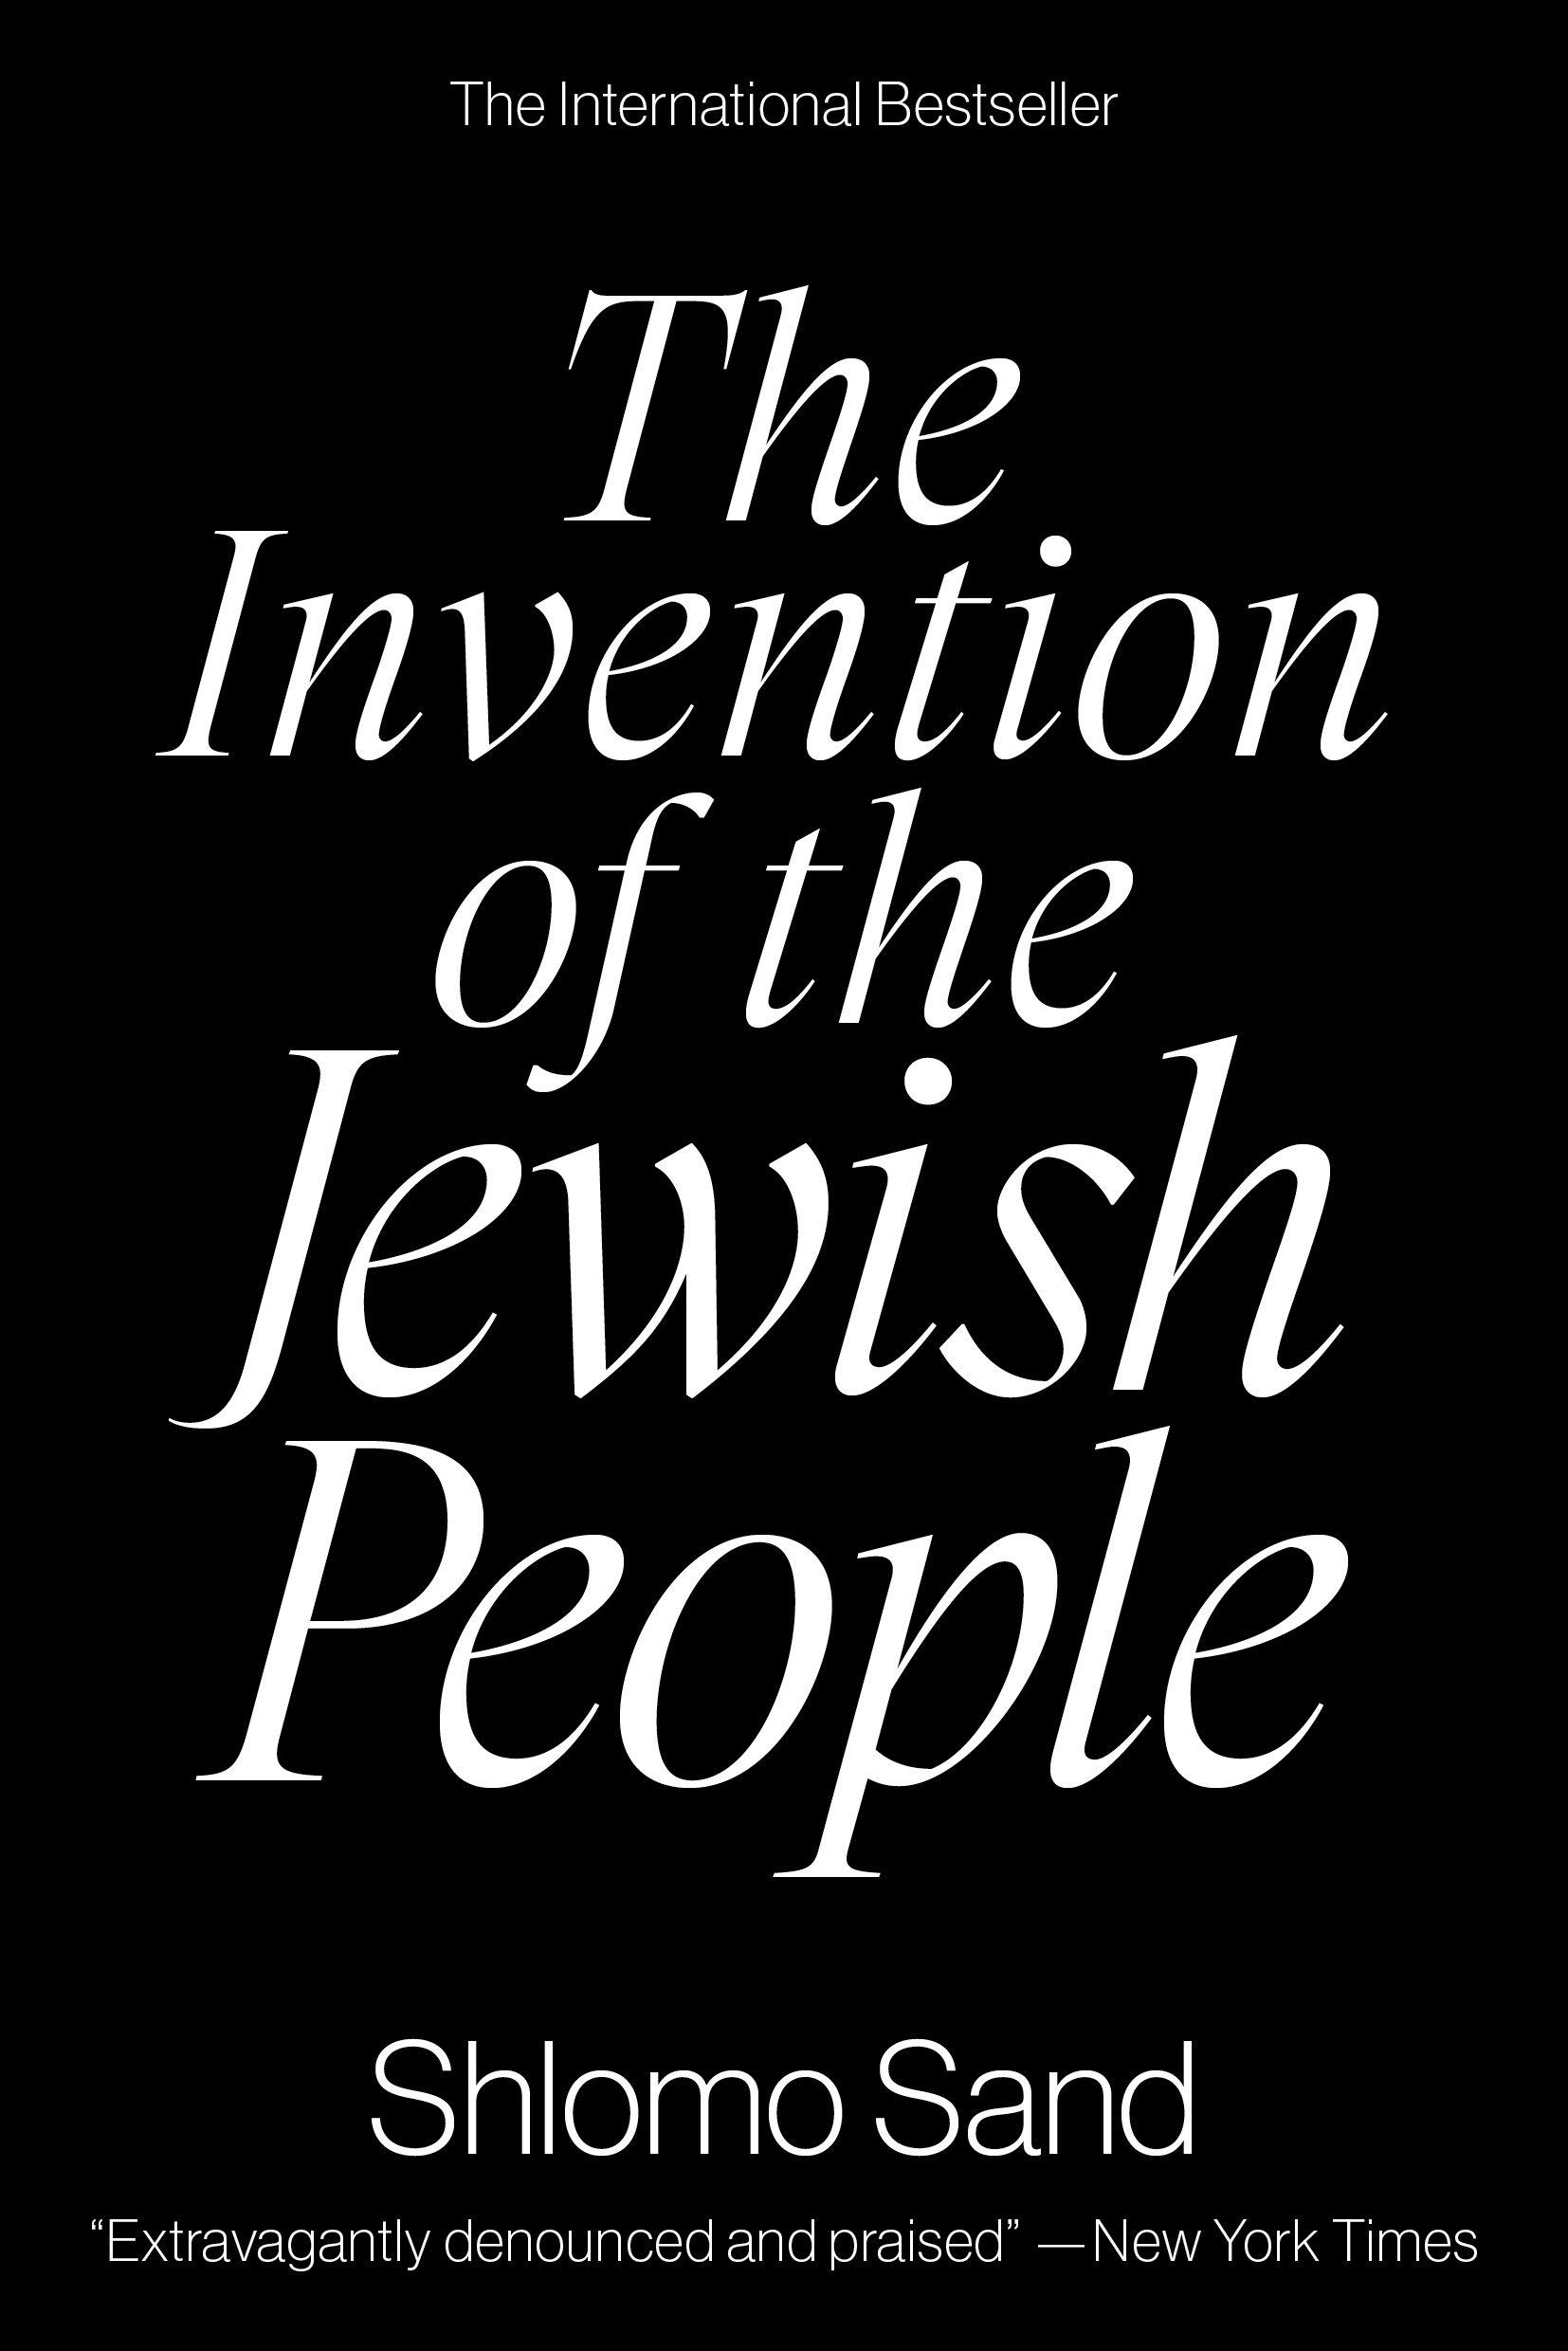 The Invention of the Jewish People | Shlomo Sand